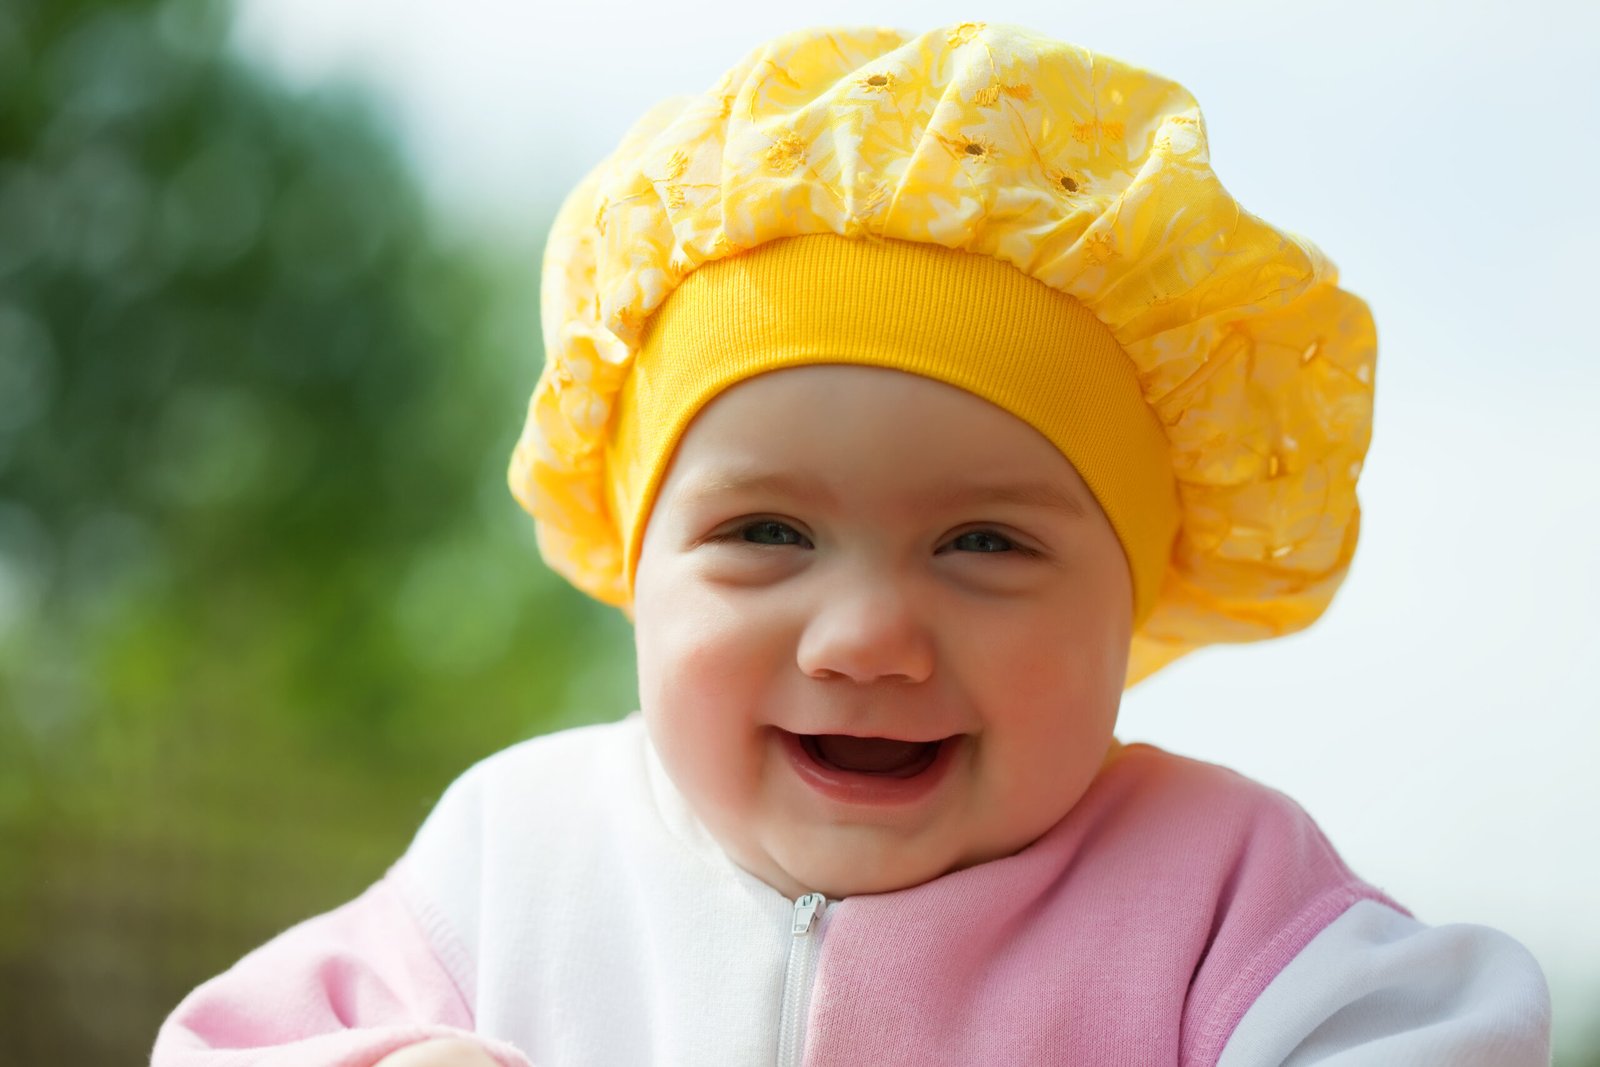 Why Should Babies Wear Hats? Understanding the Importance